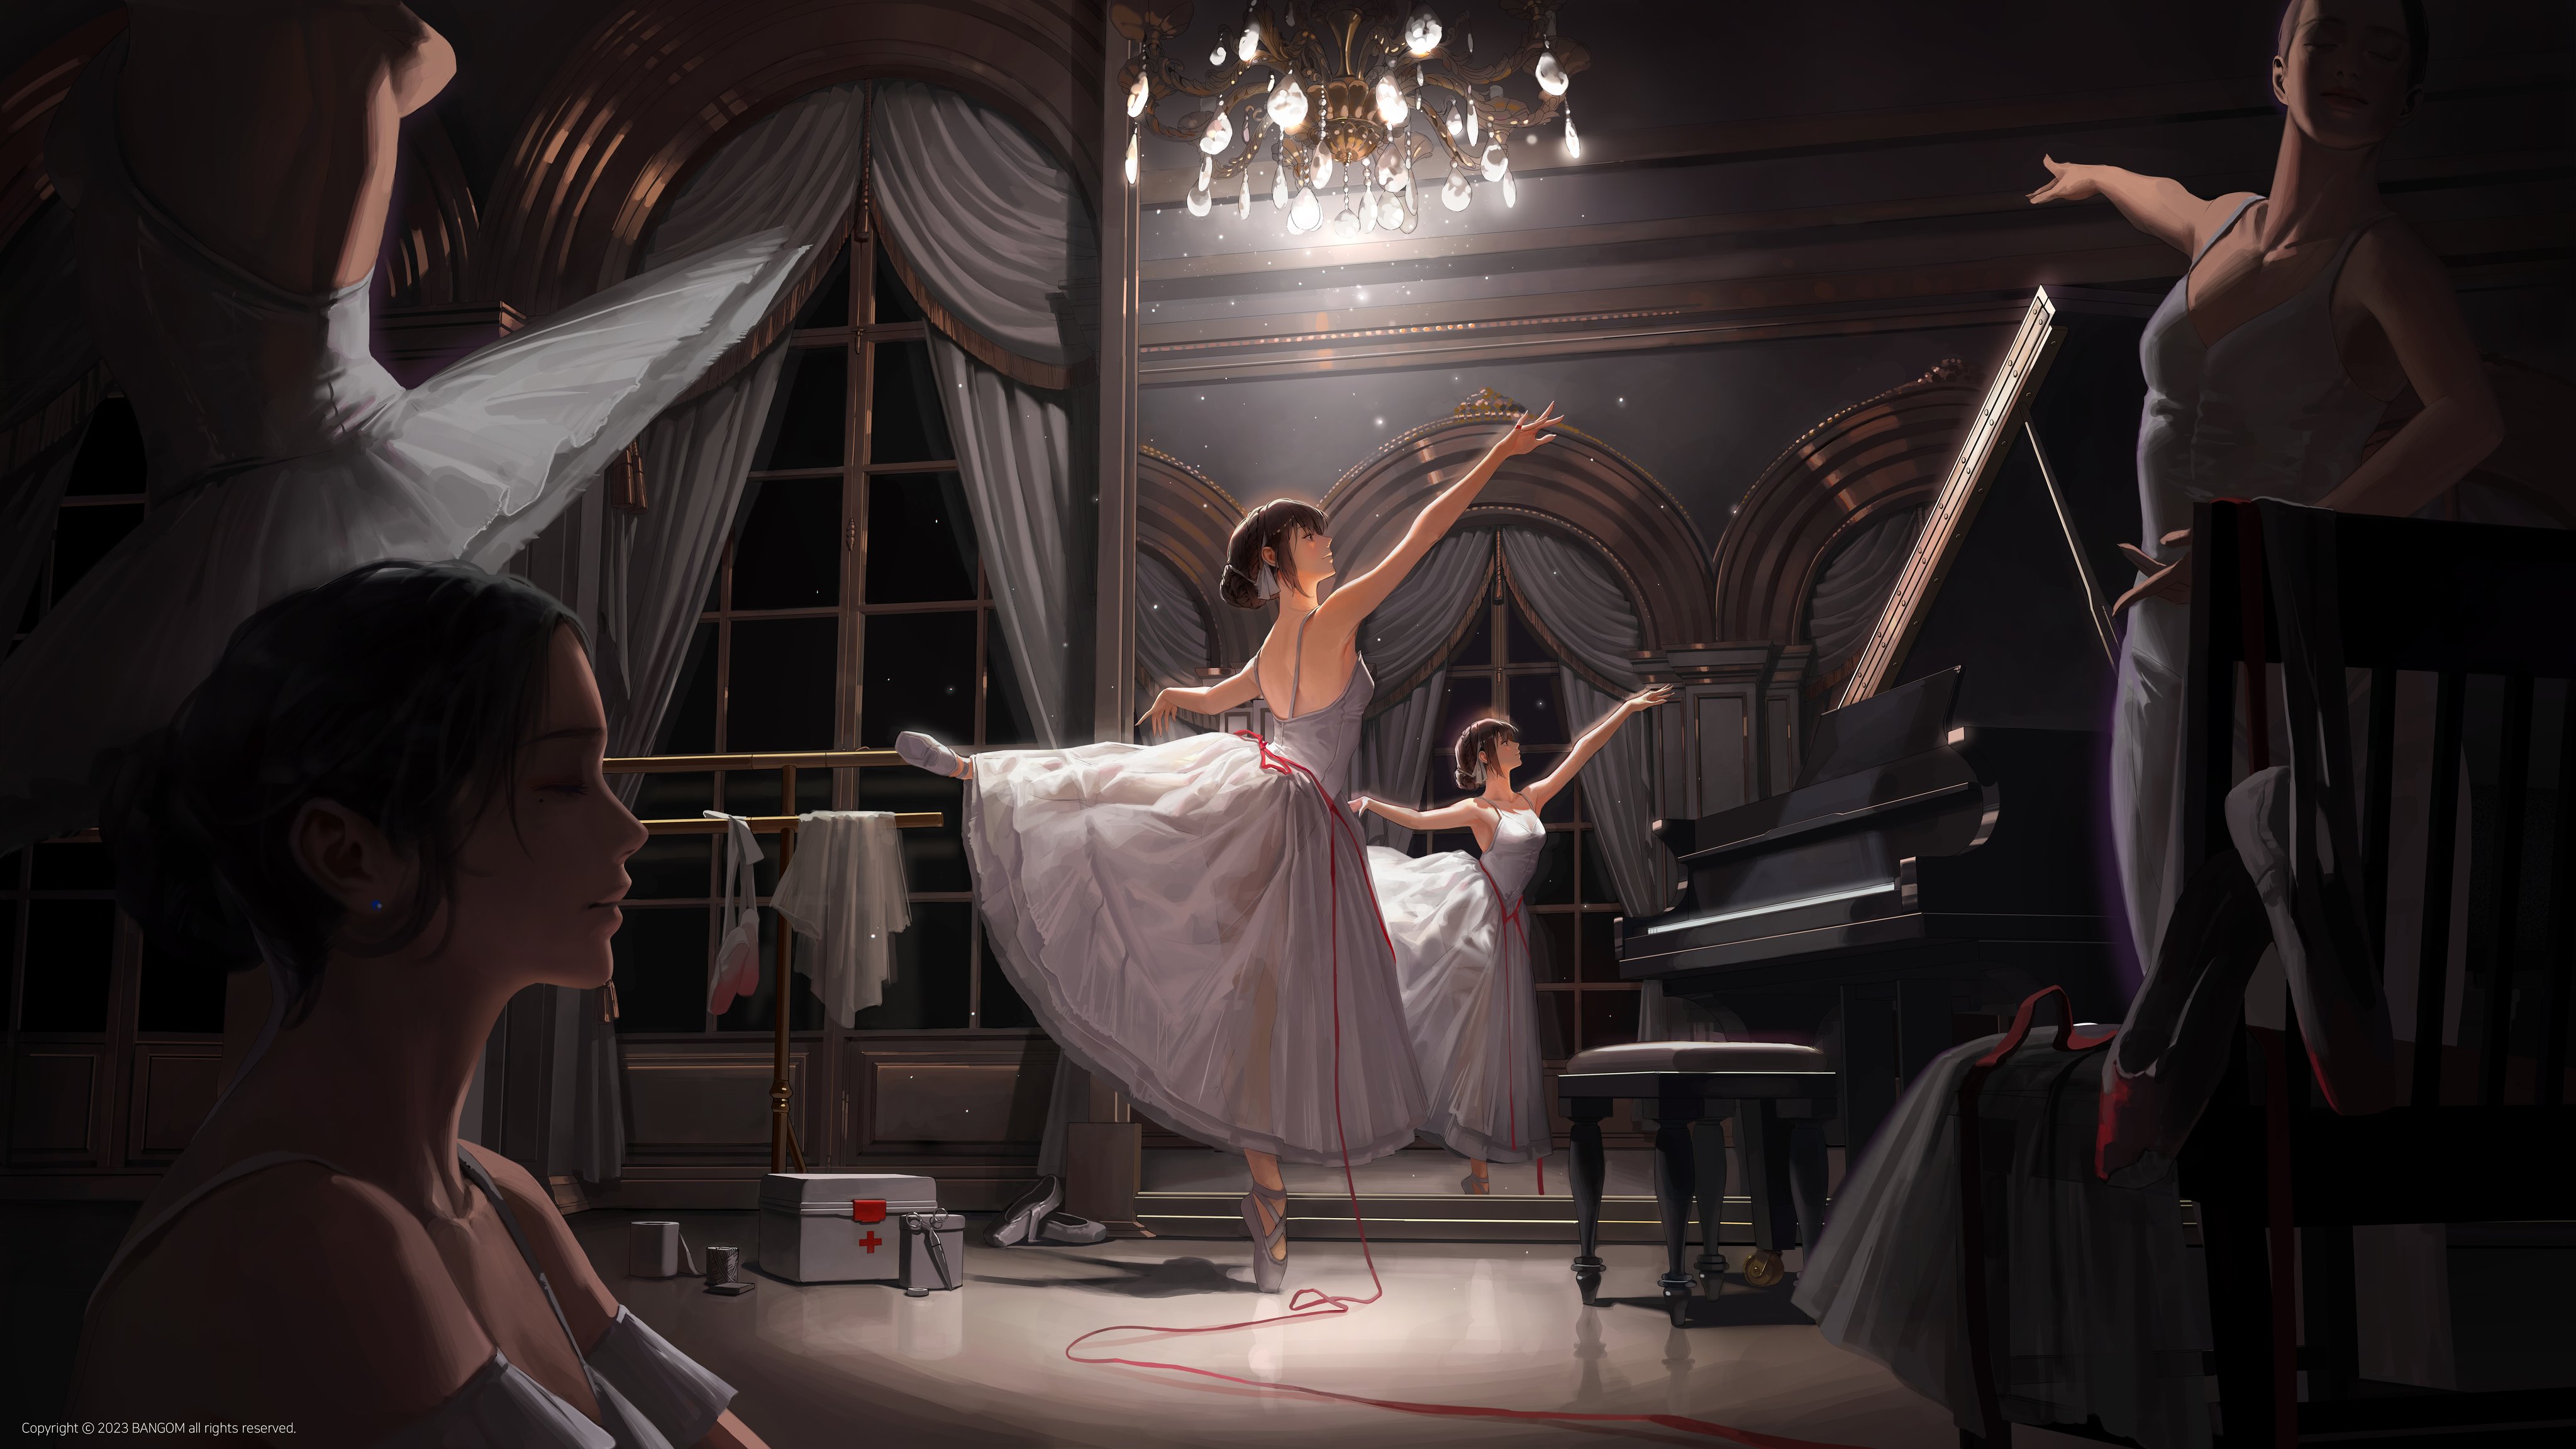 Anime 4096x2304 Bangsom ballerina anime girls sleeveless group of women ballet ballet shoes chandeliers musical instrument piano white dress watermarked standing on one leg mirror reflection women indoors profile see-through dress dress group of people tiptoe looking up window standing dark hair dancing closed eyes leg up